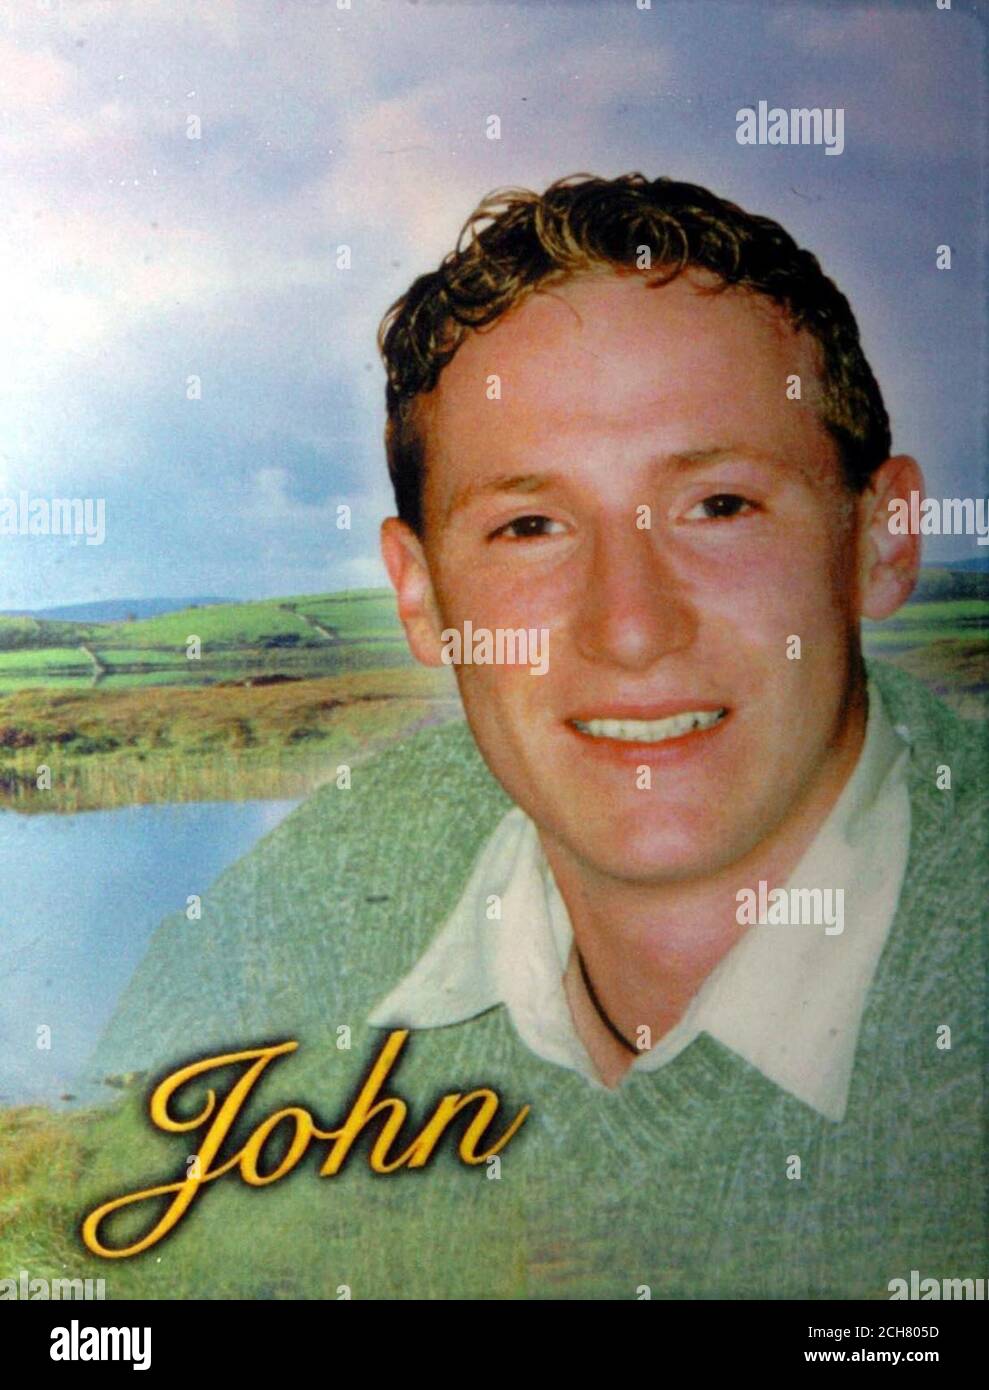 Undated collect photo of a memorial card showing a photo of John Hanrahan, who was found to have died accidentally at Dublin Coroners Court after he lost control of the racing-kart he was driving at Mondello Park racetrack last year, on May 25, during a practice lap at a race-meet. Stock Photo